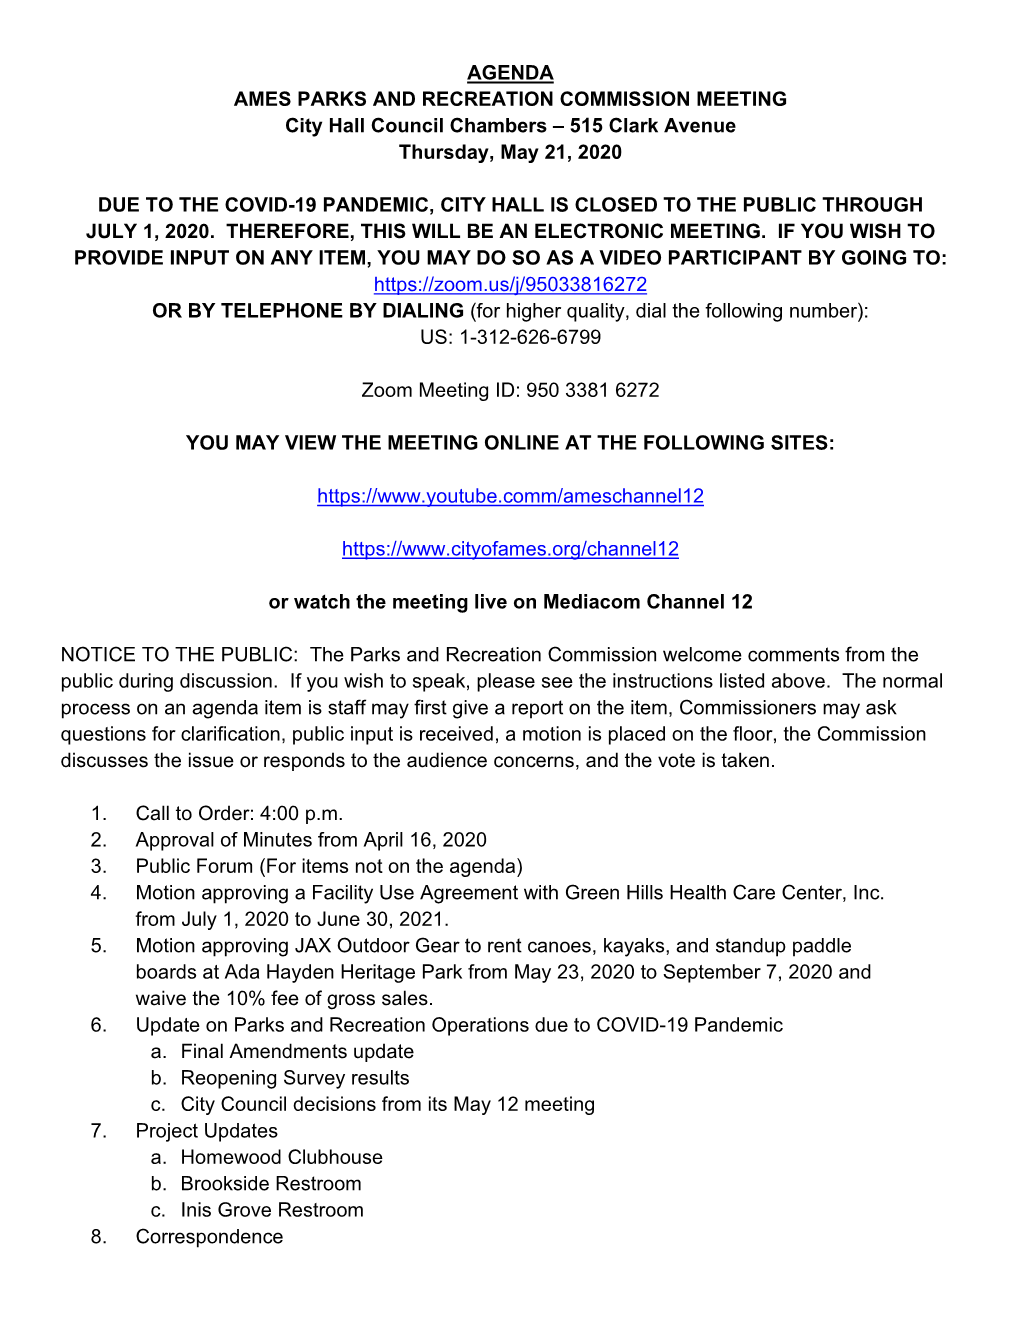 AGENDA AMES PARKS and RECREATION COMMISSION MEETING City Hall Council Chambers – 515 Clark Avenue Thursday, May 21, 2020